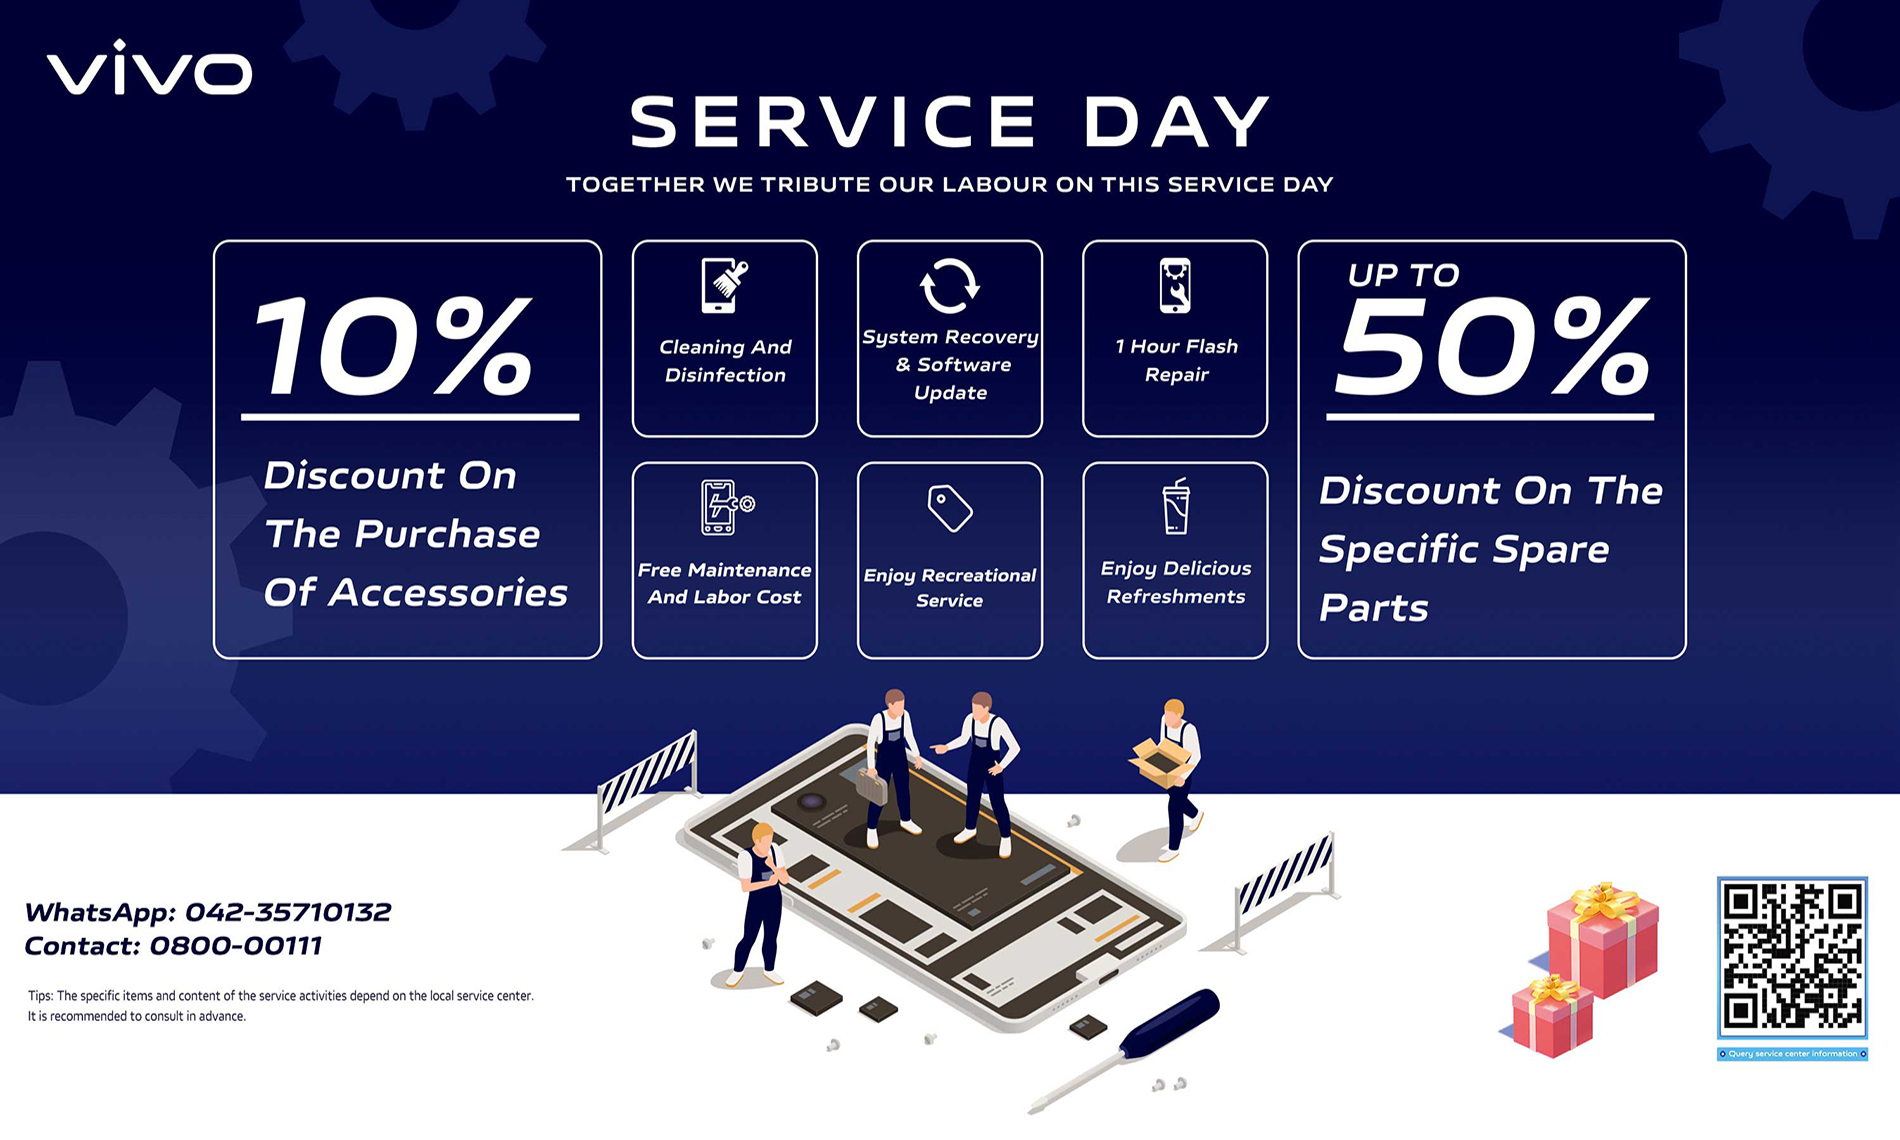 Enjoy the Superior Service and Save Big on vivo Service Day